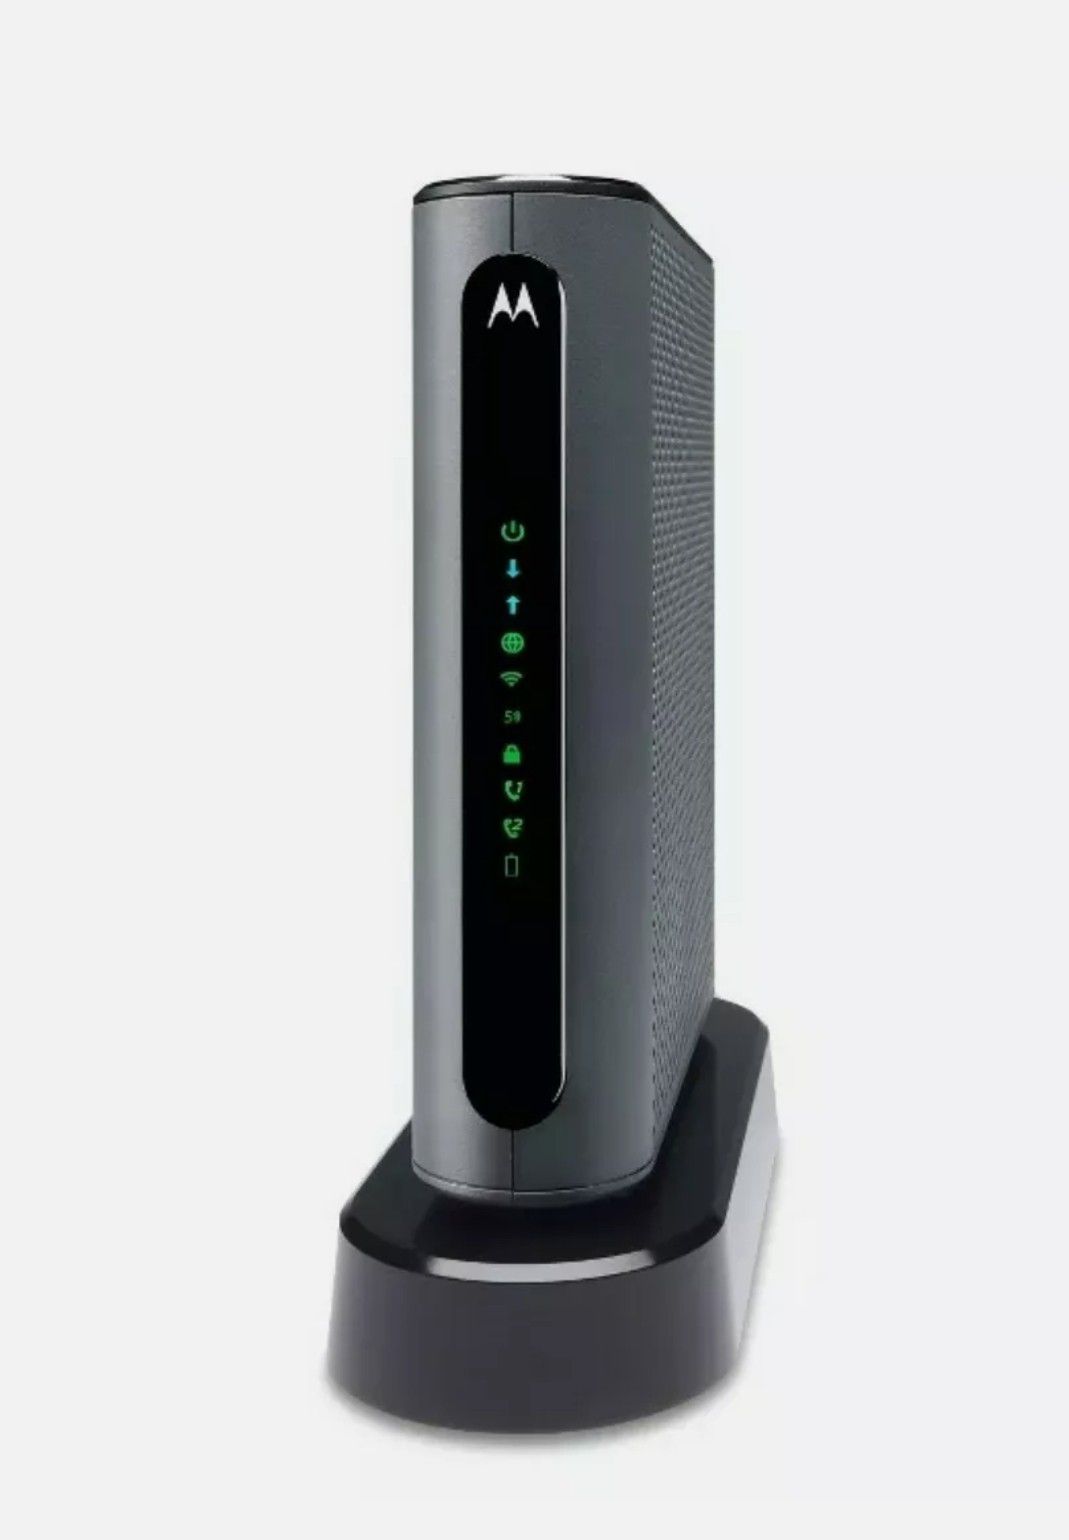 Motorola MT7711 24X8 Cable Modem and AC1900 Dual Band Wi-Fi Gigabit Router (Retail: $199.99)